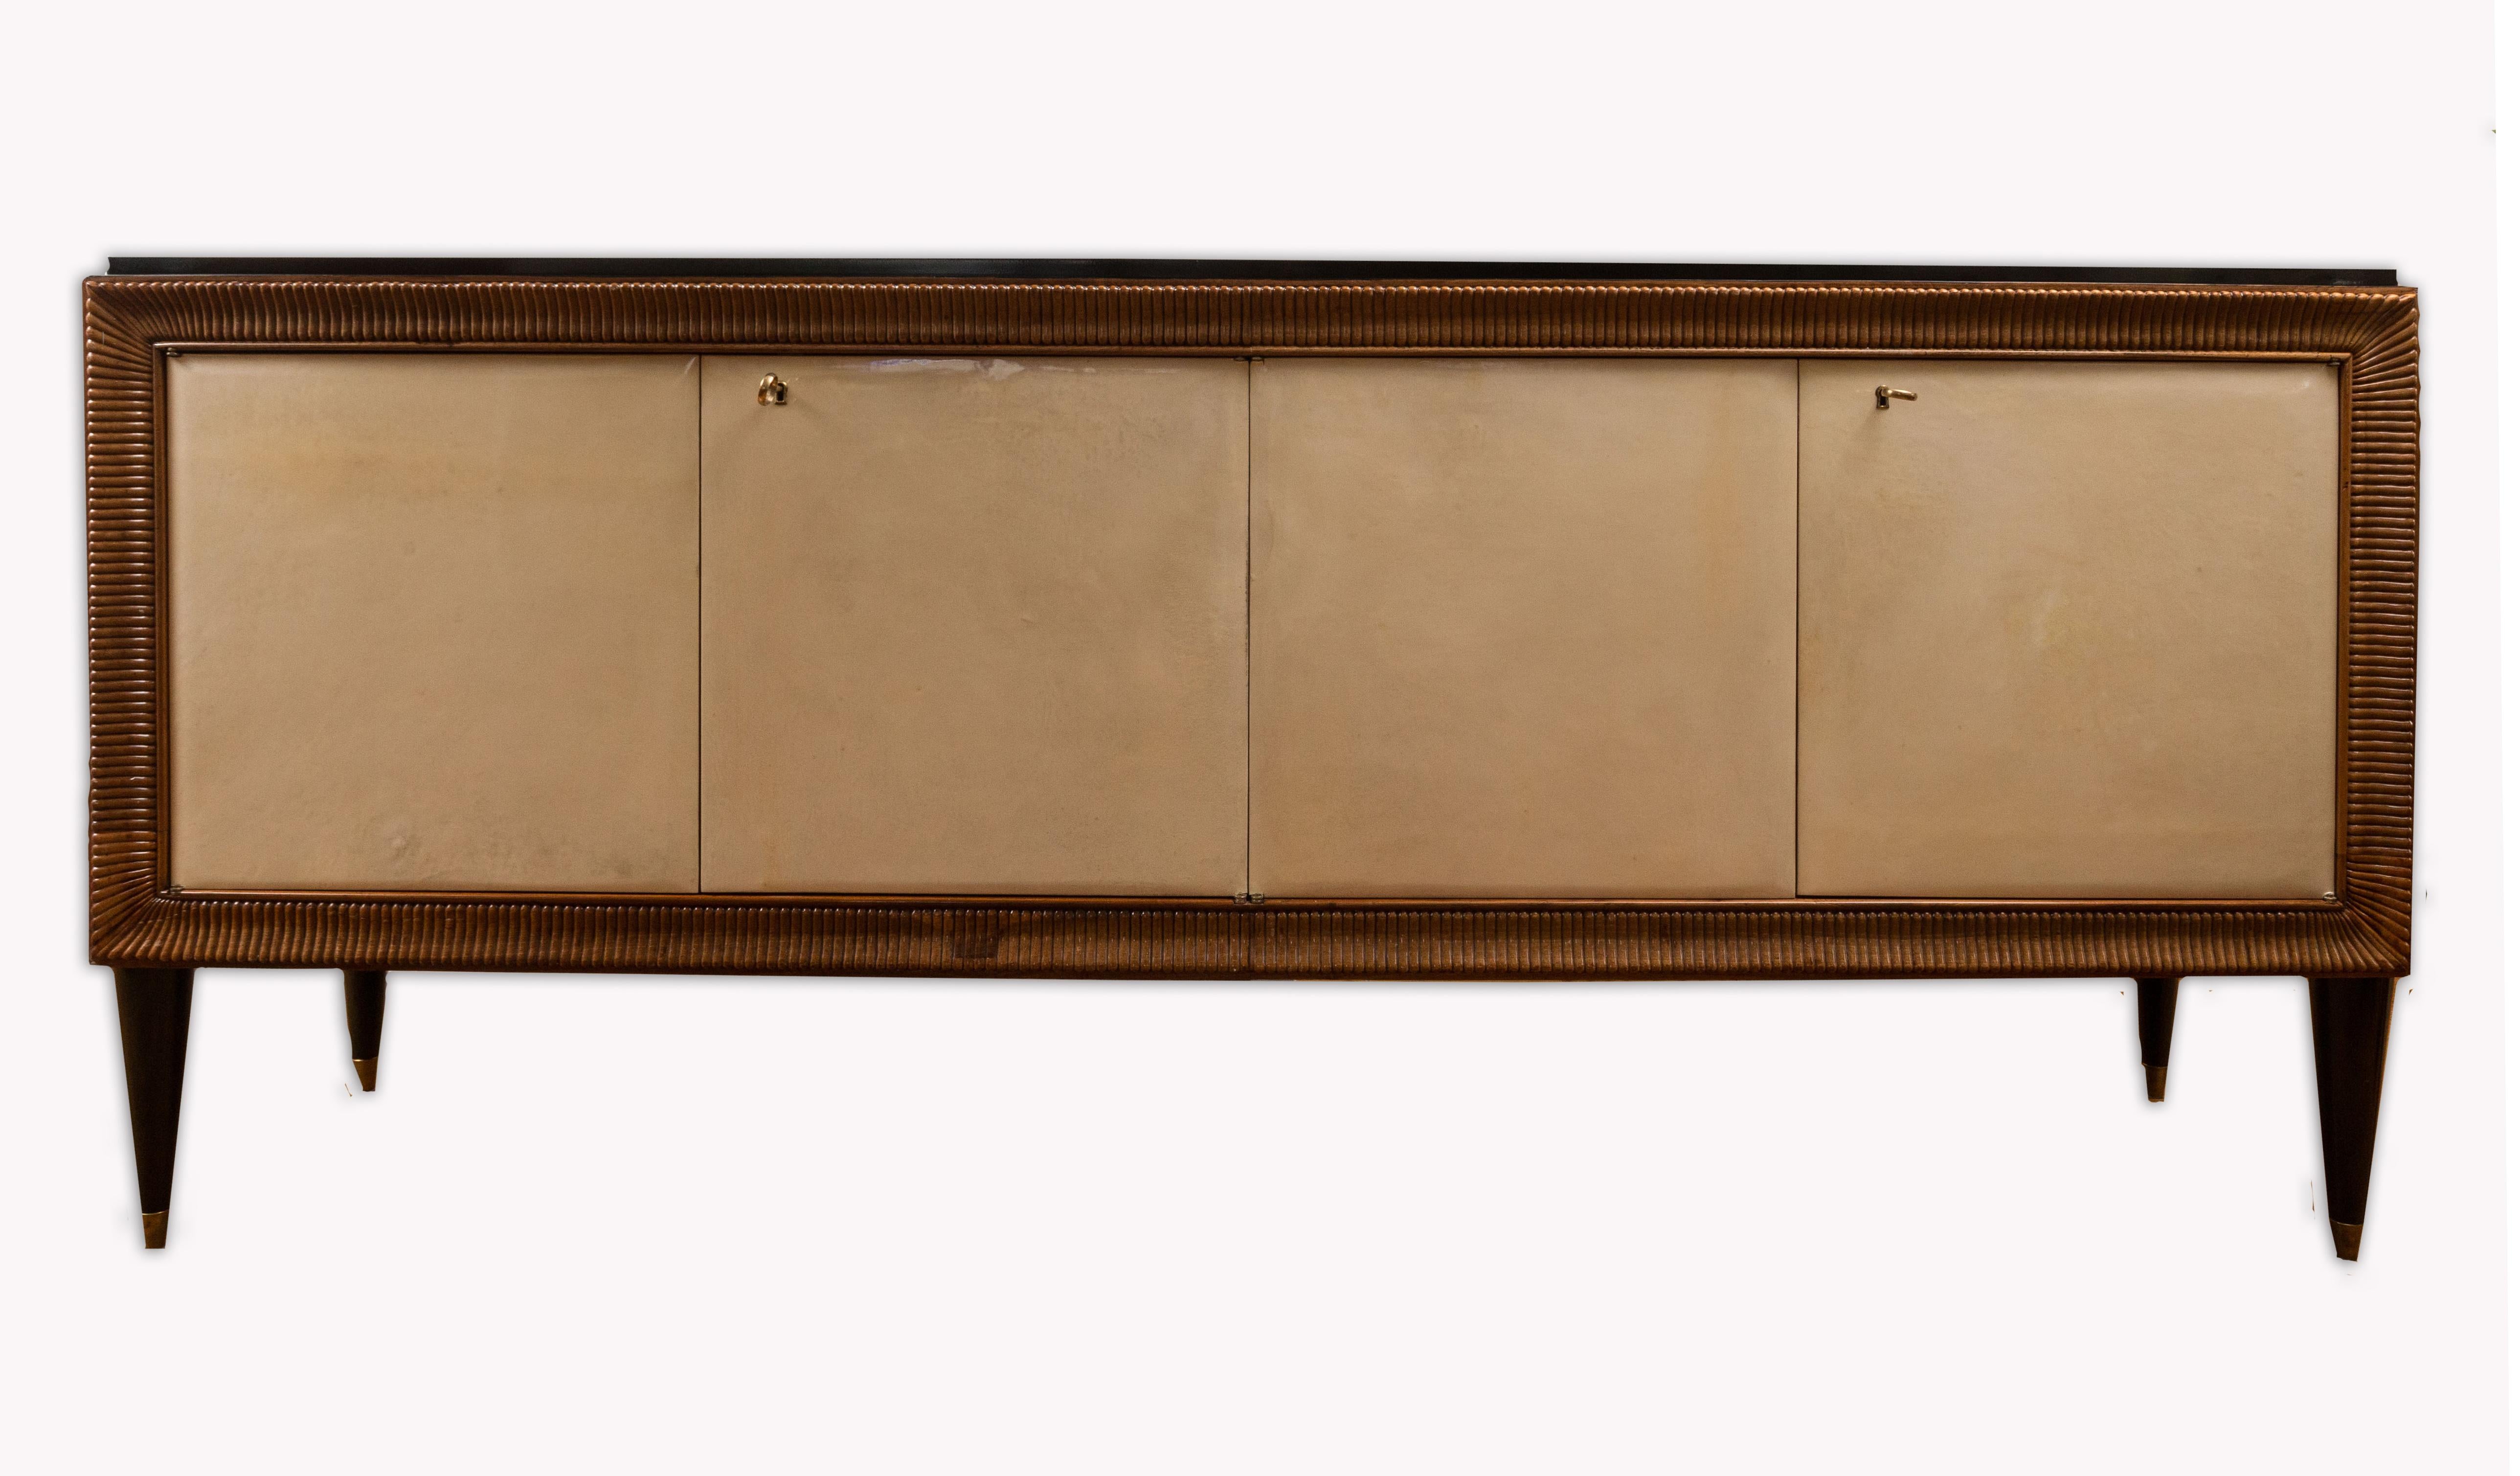 A wonderful Italian modernized Deco style sideboard with a black lacquered stepped plateau above four parchment doors surrounded by  a framed reeded walnut detailing and finishing on rounded and tapered lacquered feet with bronze casters. Lovely